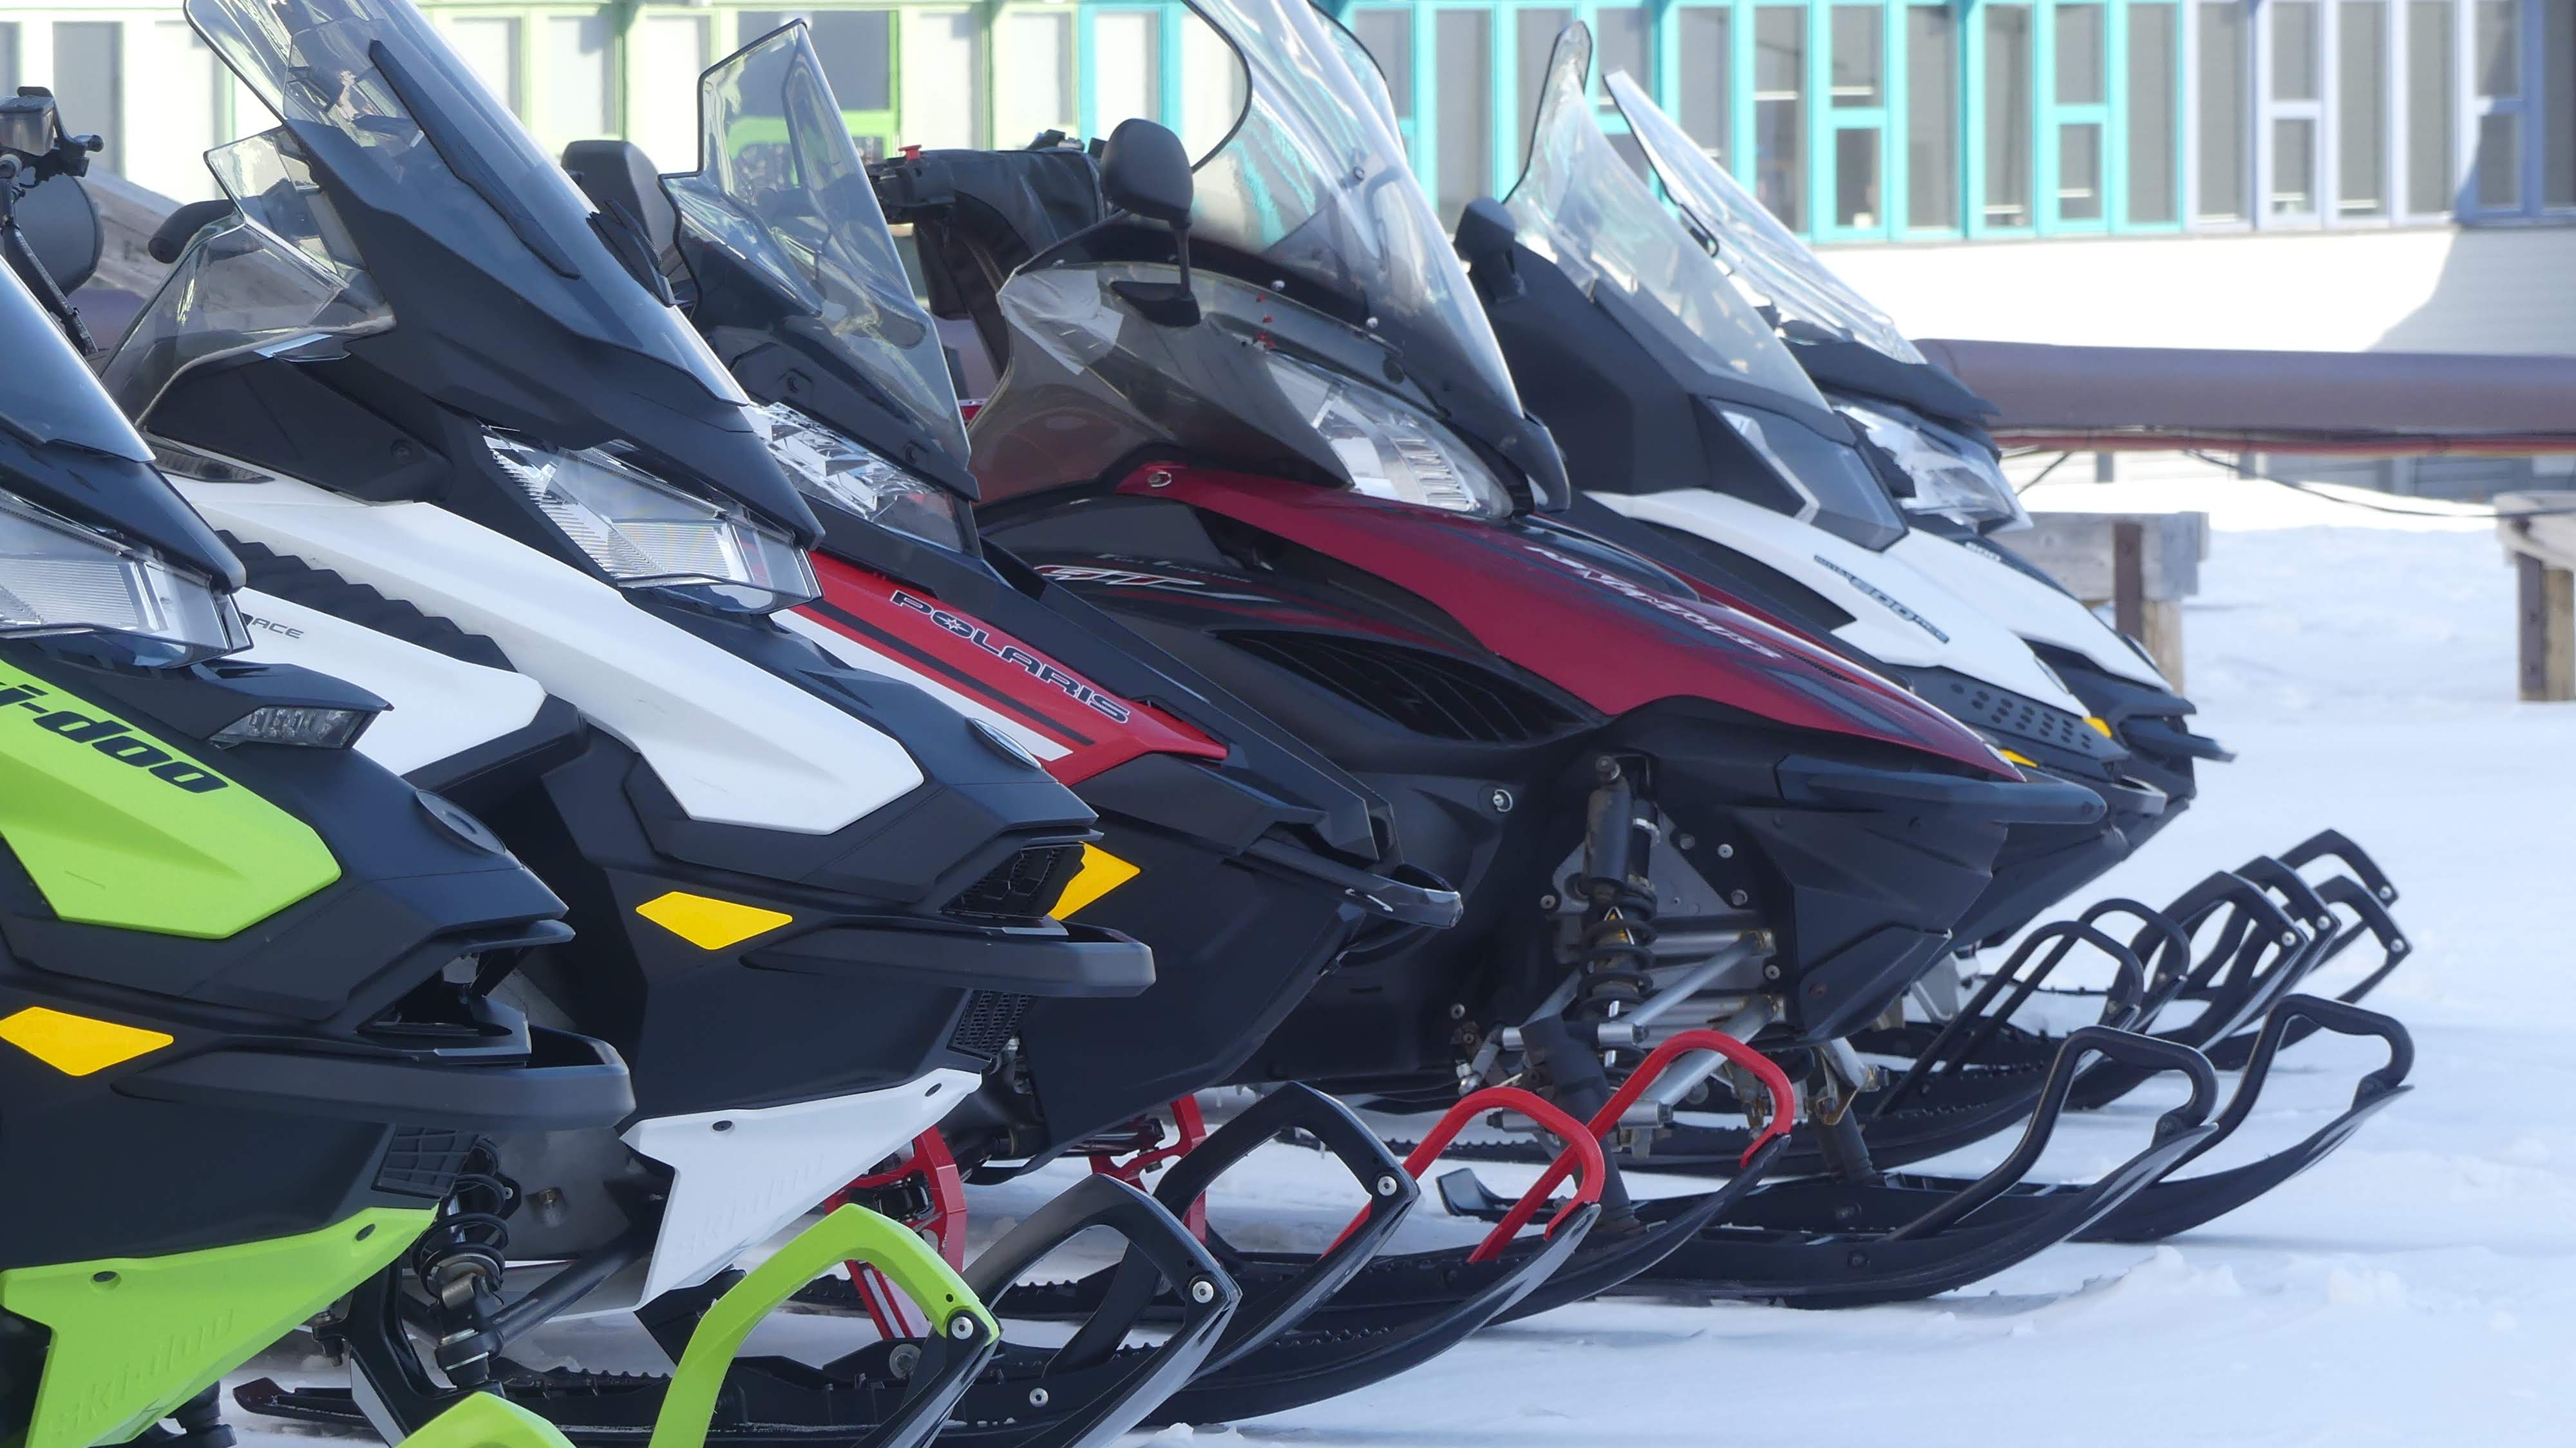 A line of parked skidoos on snow